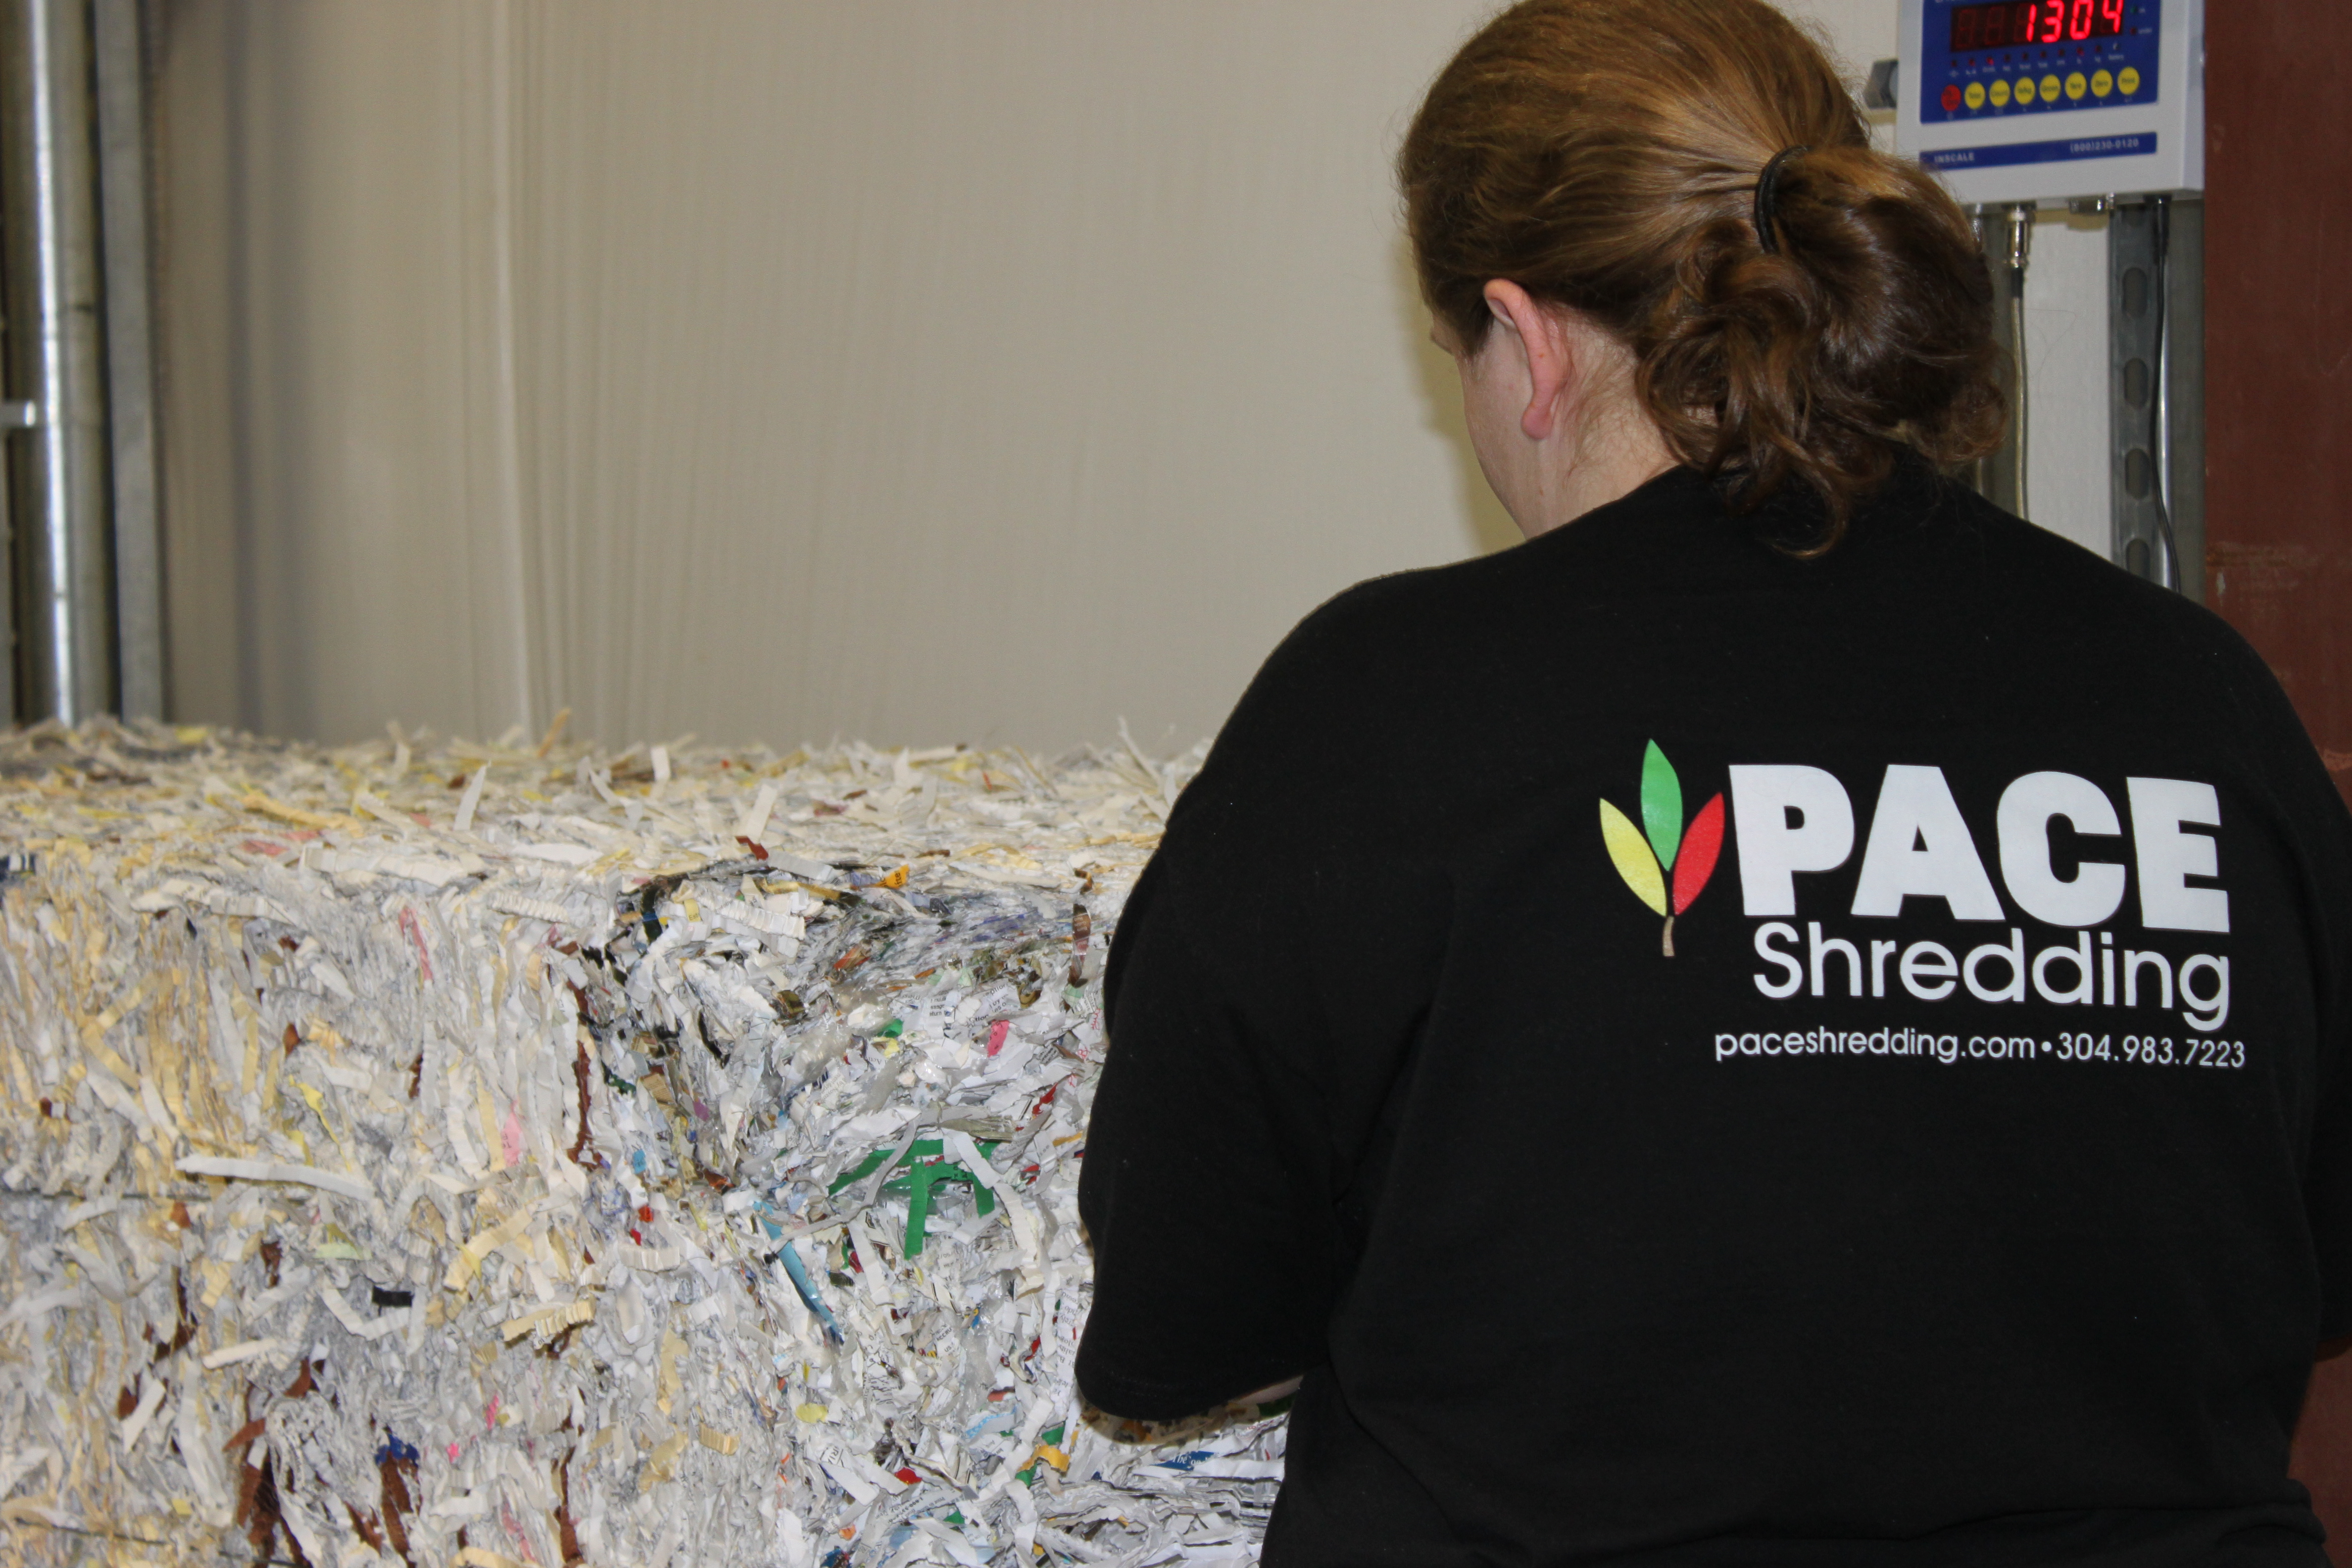 PACE Shredding recycles all documents.